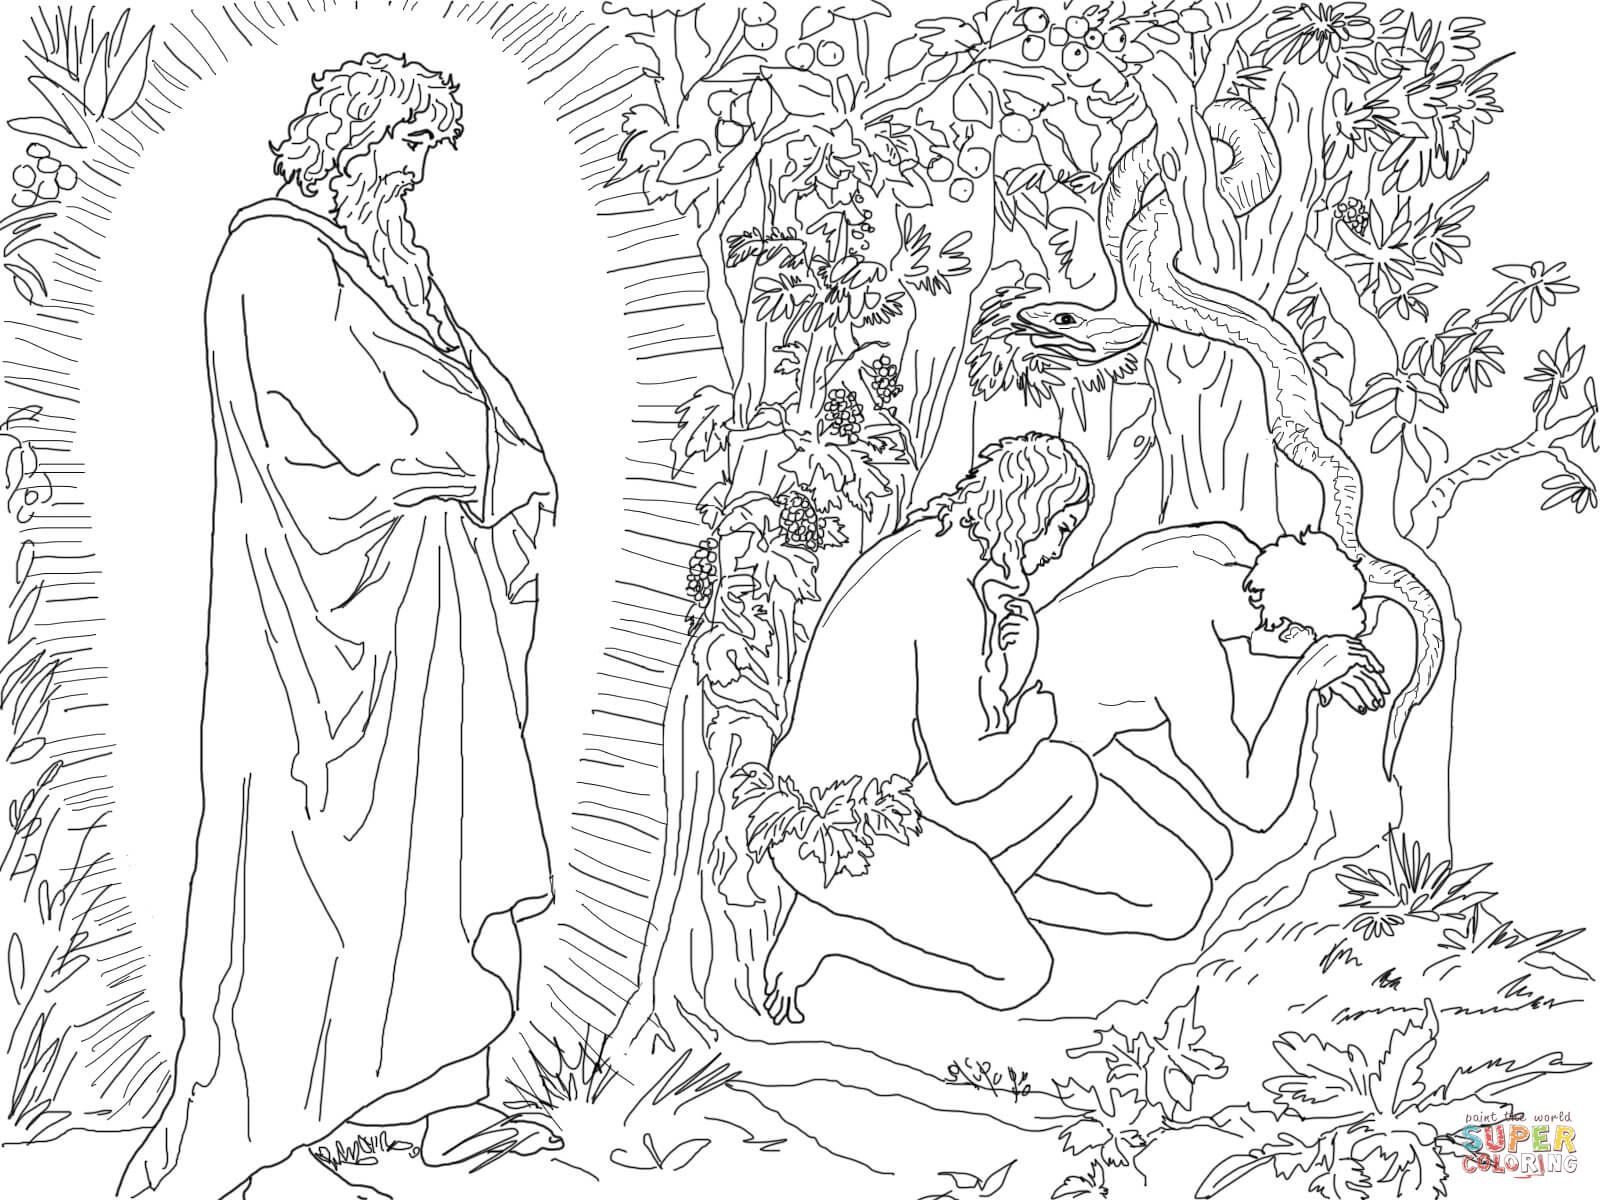 Adam and Eve Flee from the Presence of God coloring page | Free Printable Coloring  Pages